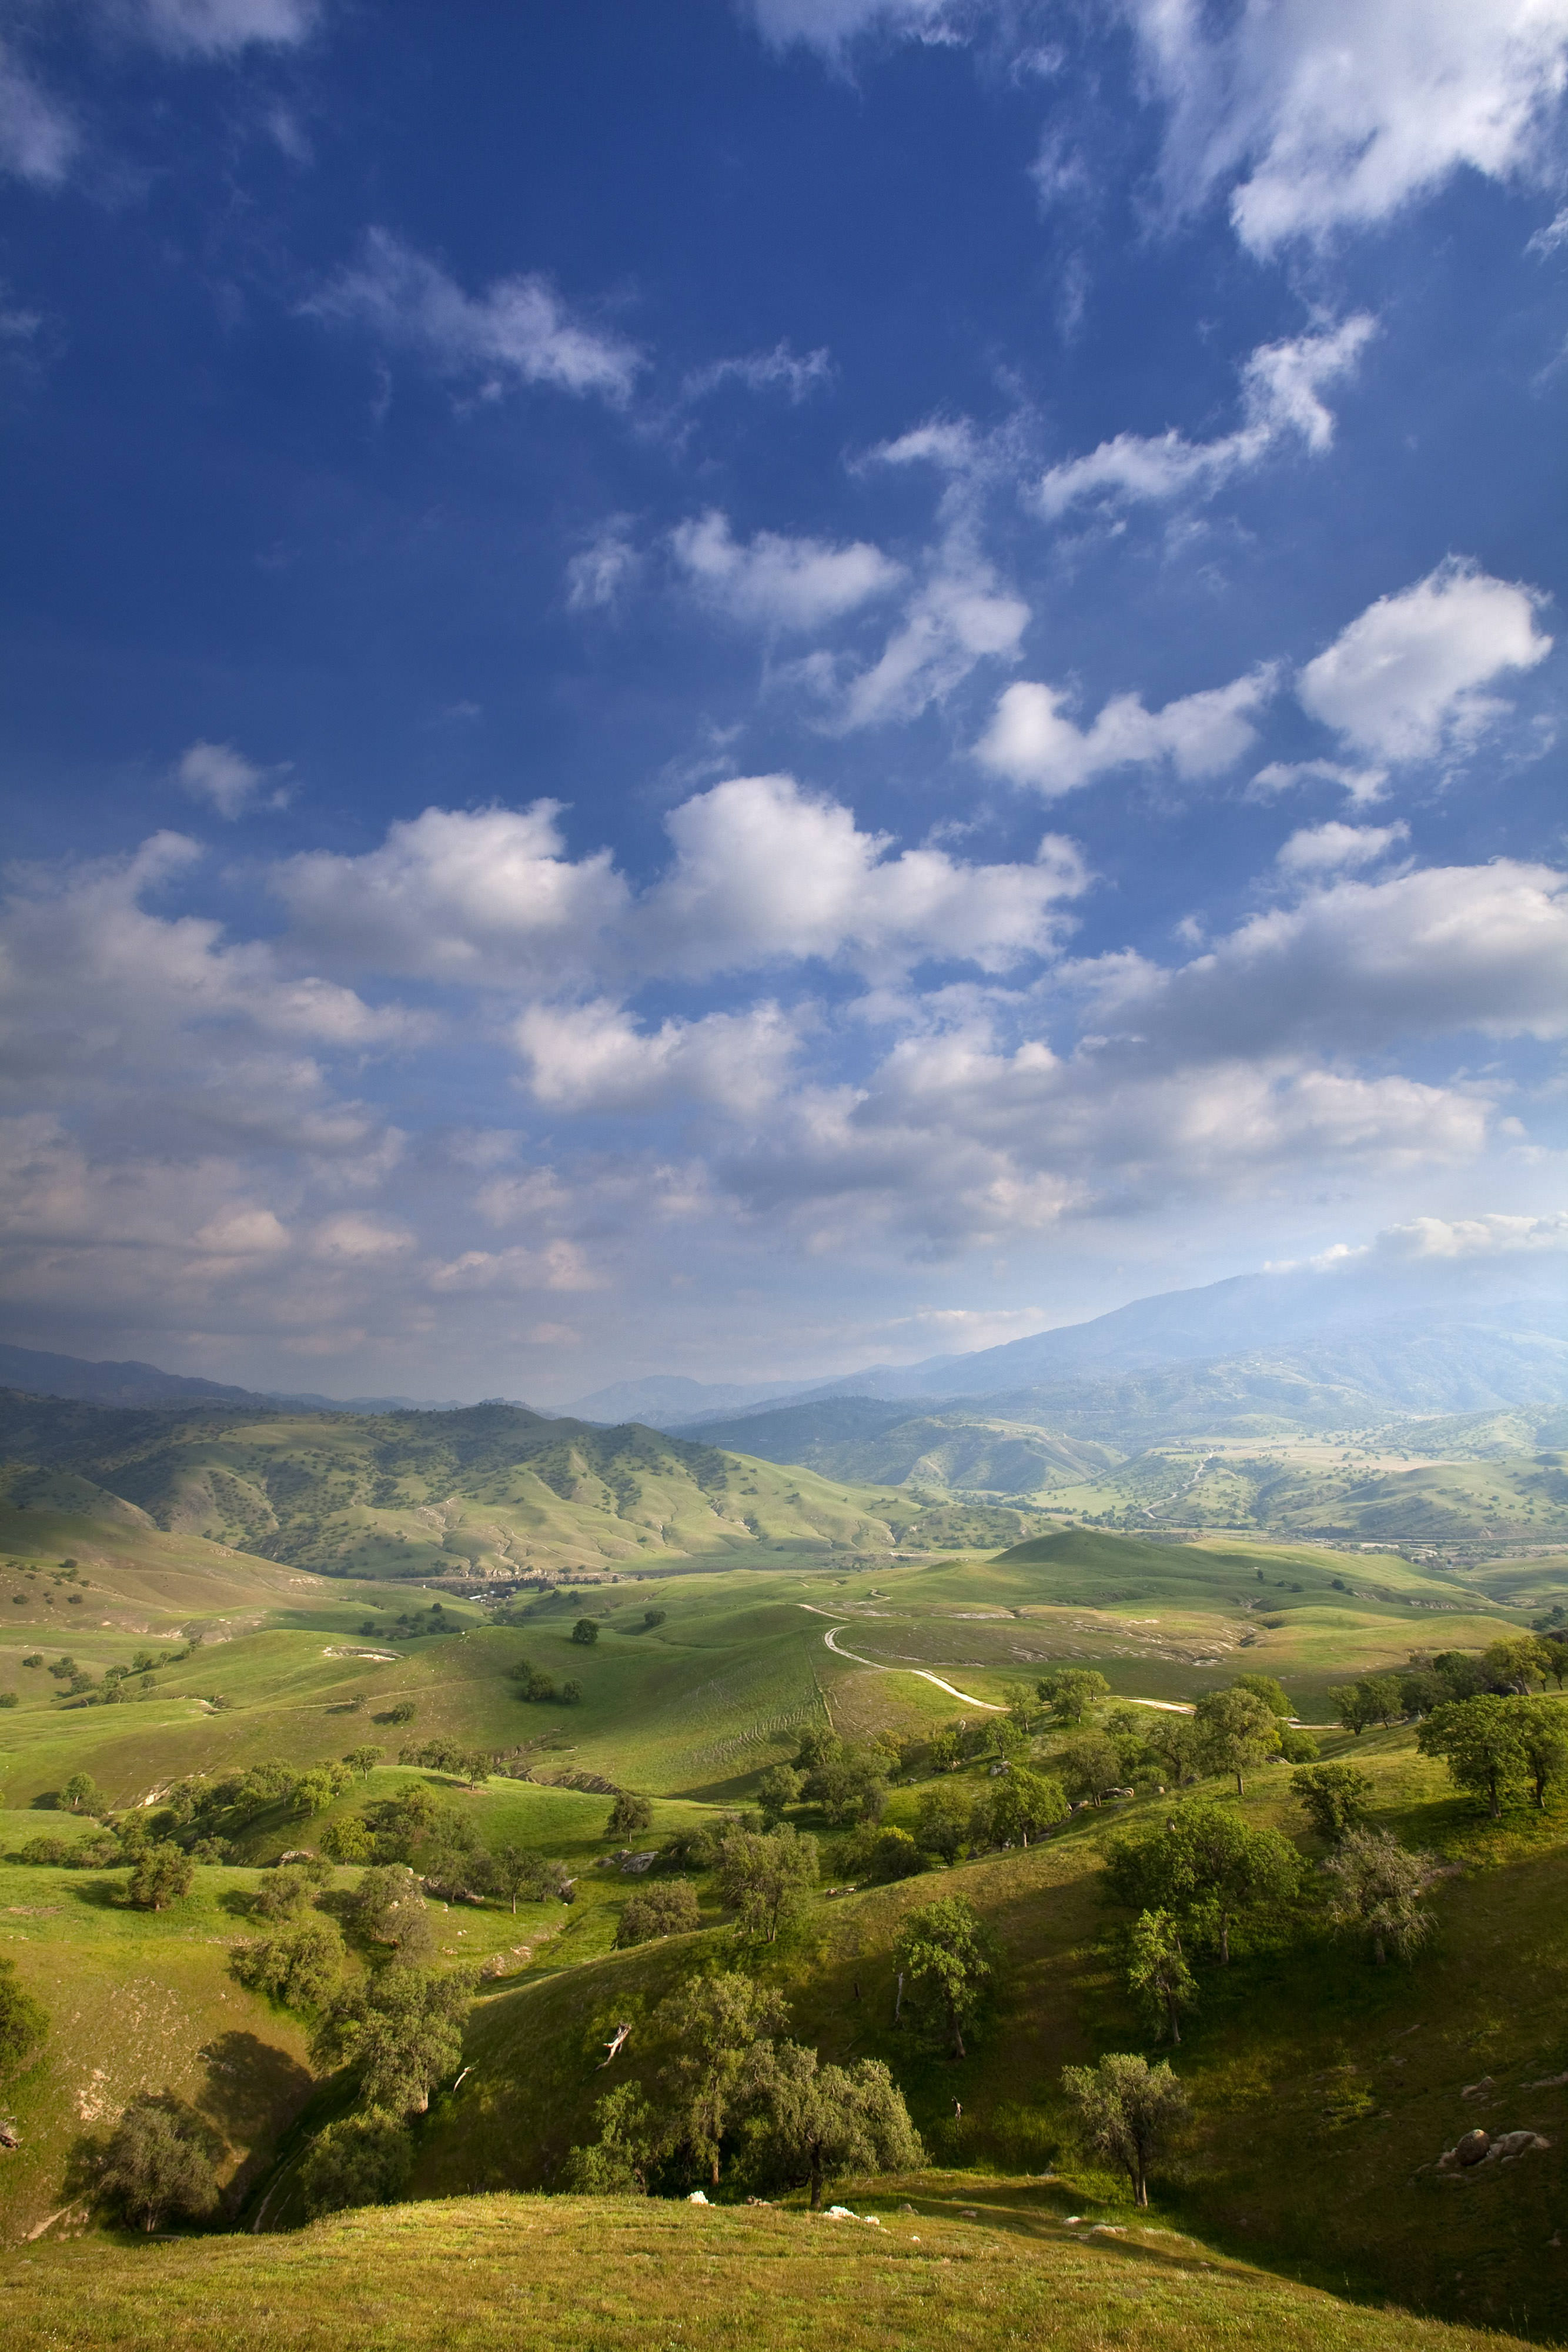 Wide landscape view of a vast valley of rolling green hills, with mountains in the far distance, under a blue sky with puffy white clouds.